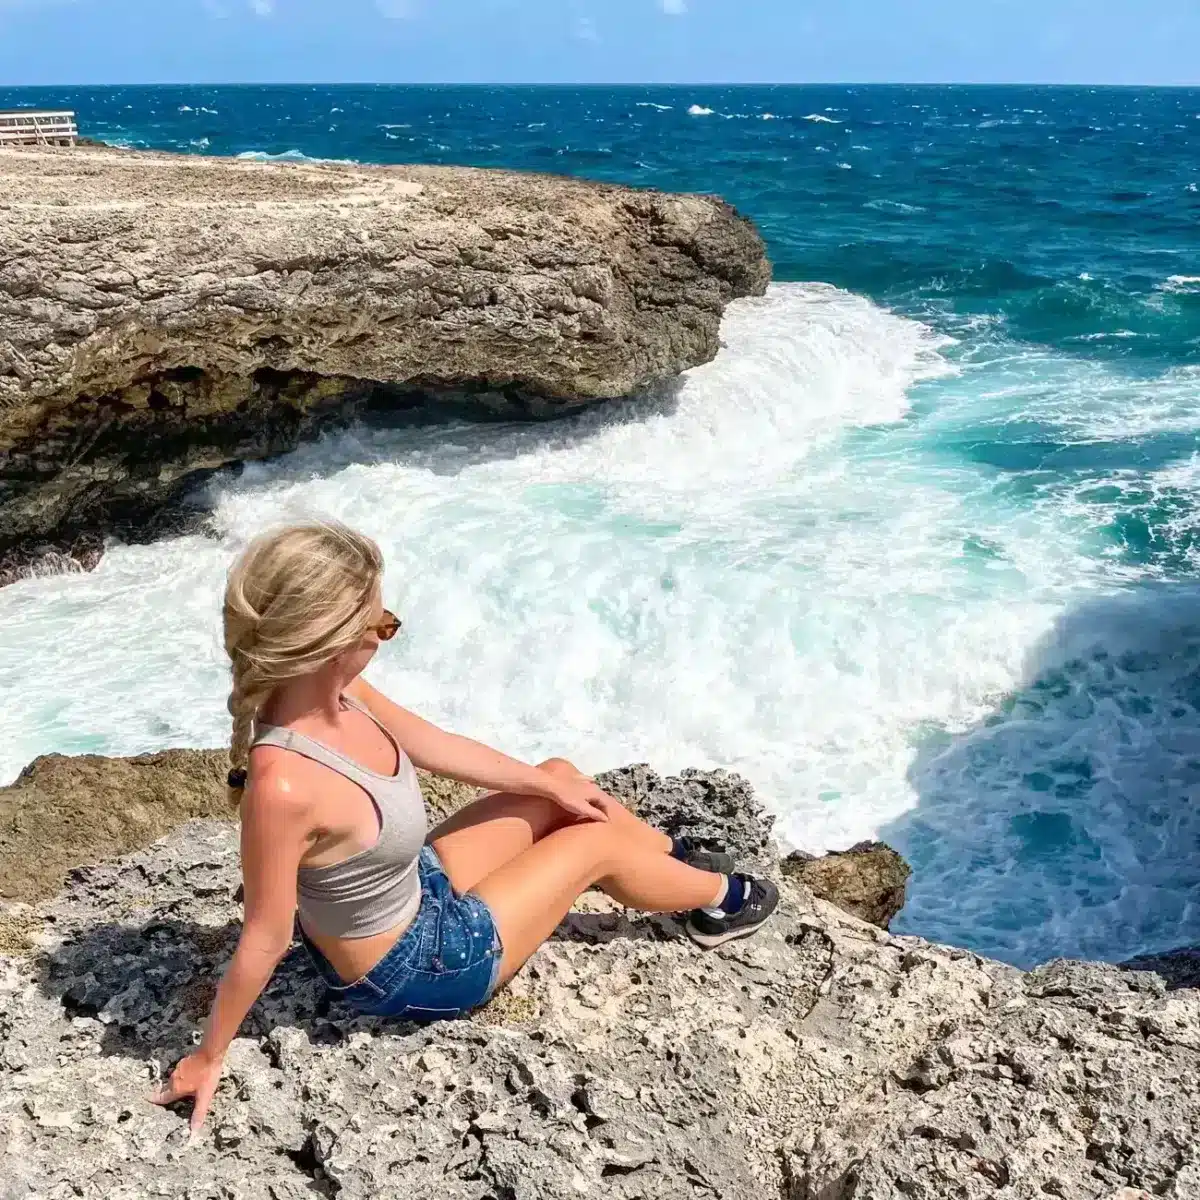 the author sitting on the edge of a cliff overlooking stunning big waves and blue water